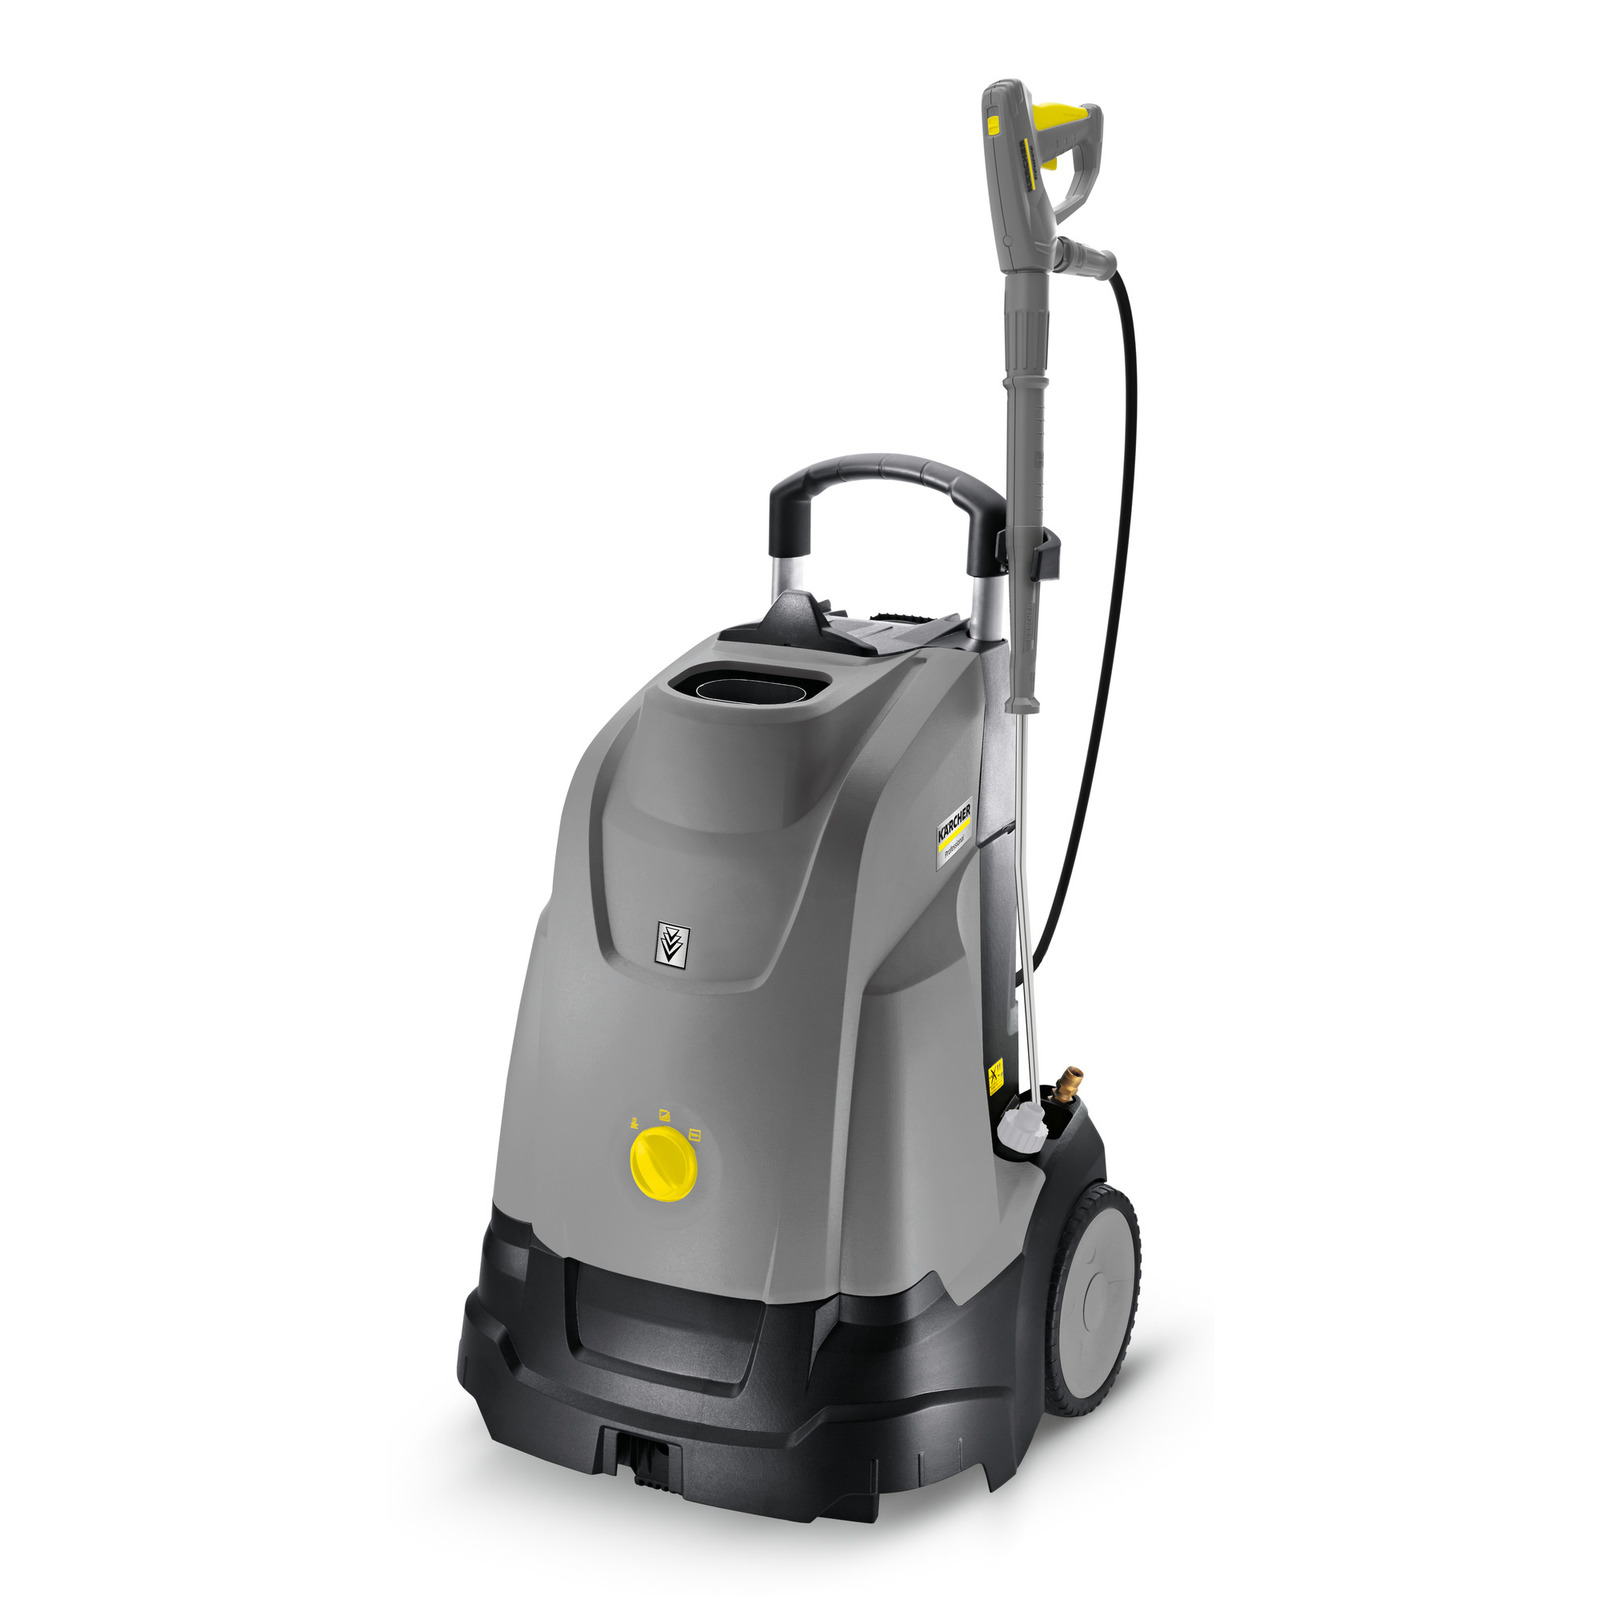 electric - Hot Water Karcher Professional 1100 PSI Pressure Washer for sale online 